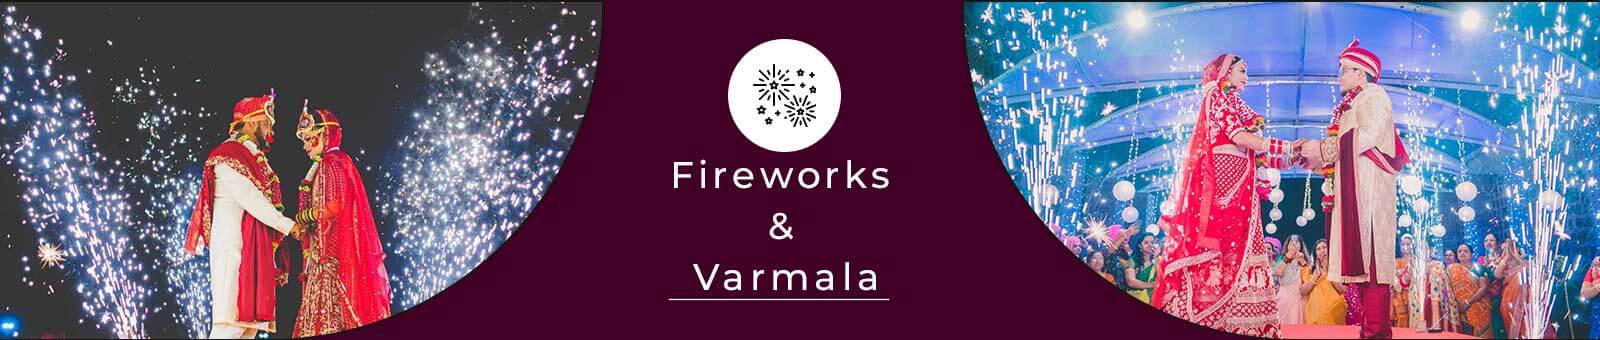 Best Varmala Services and Fireworks Providers in Ludhiana 